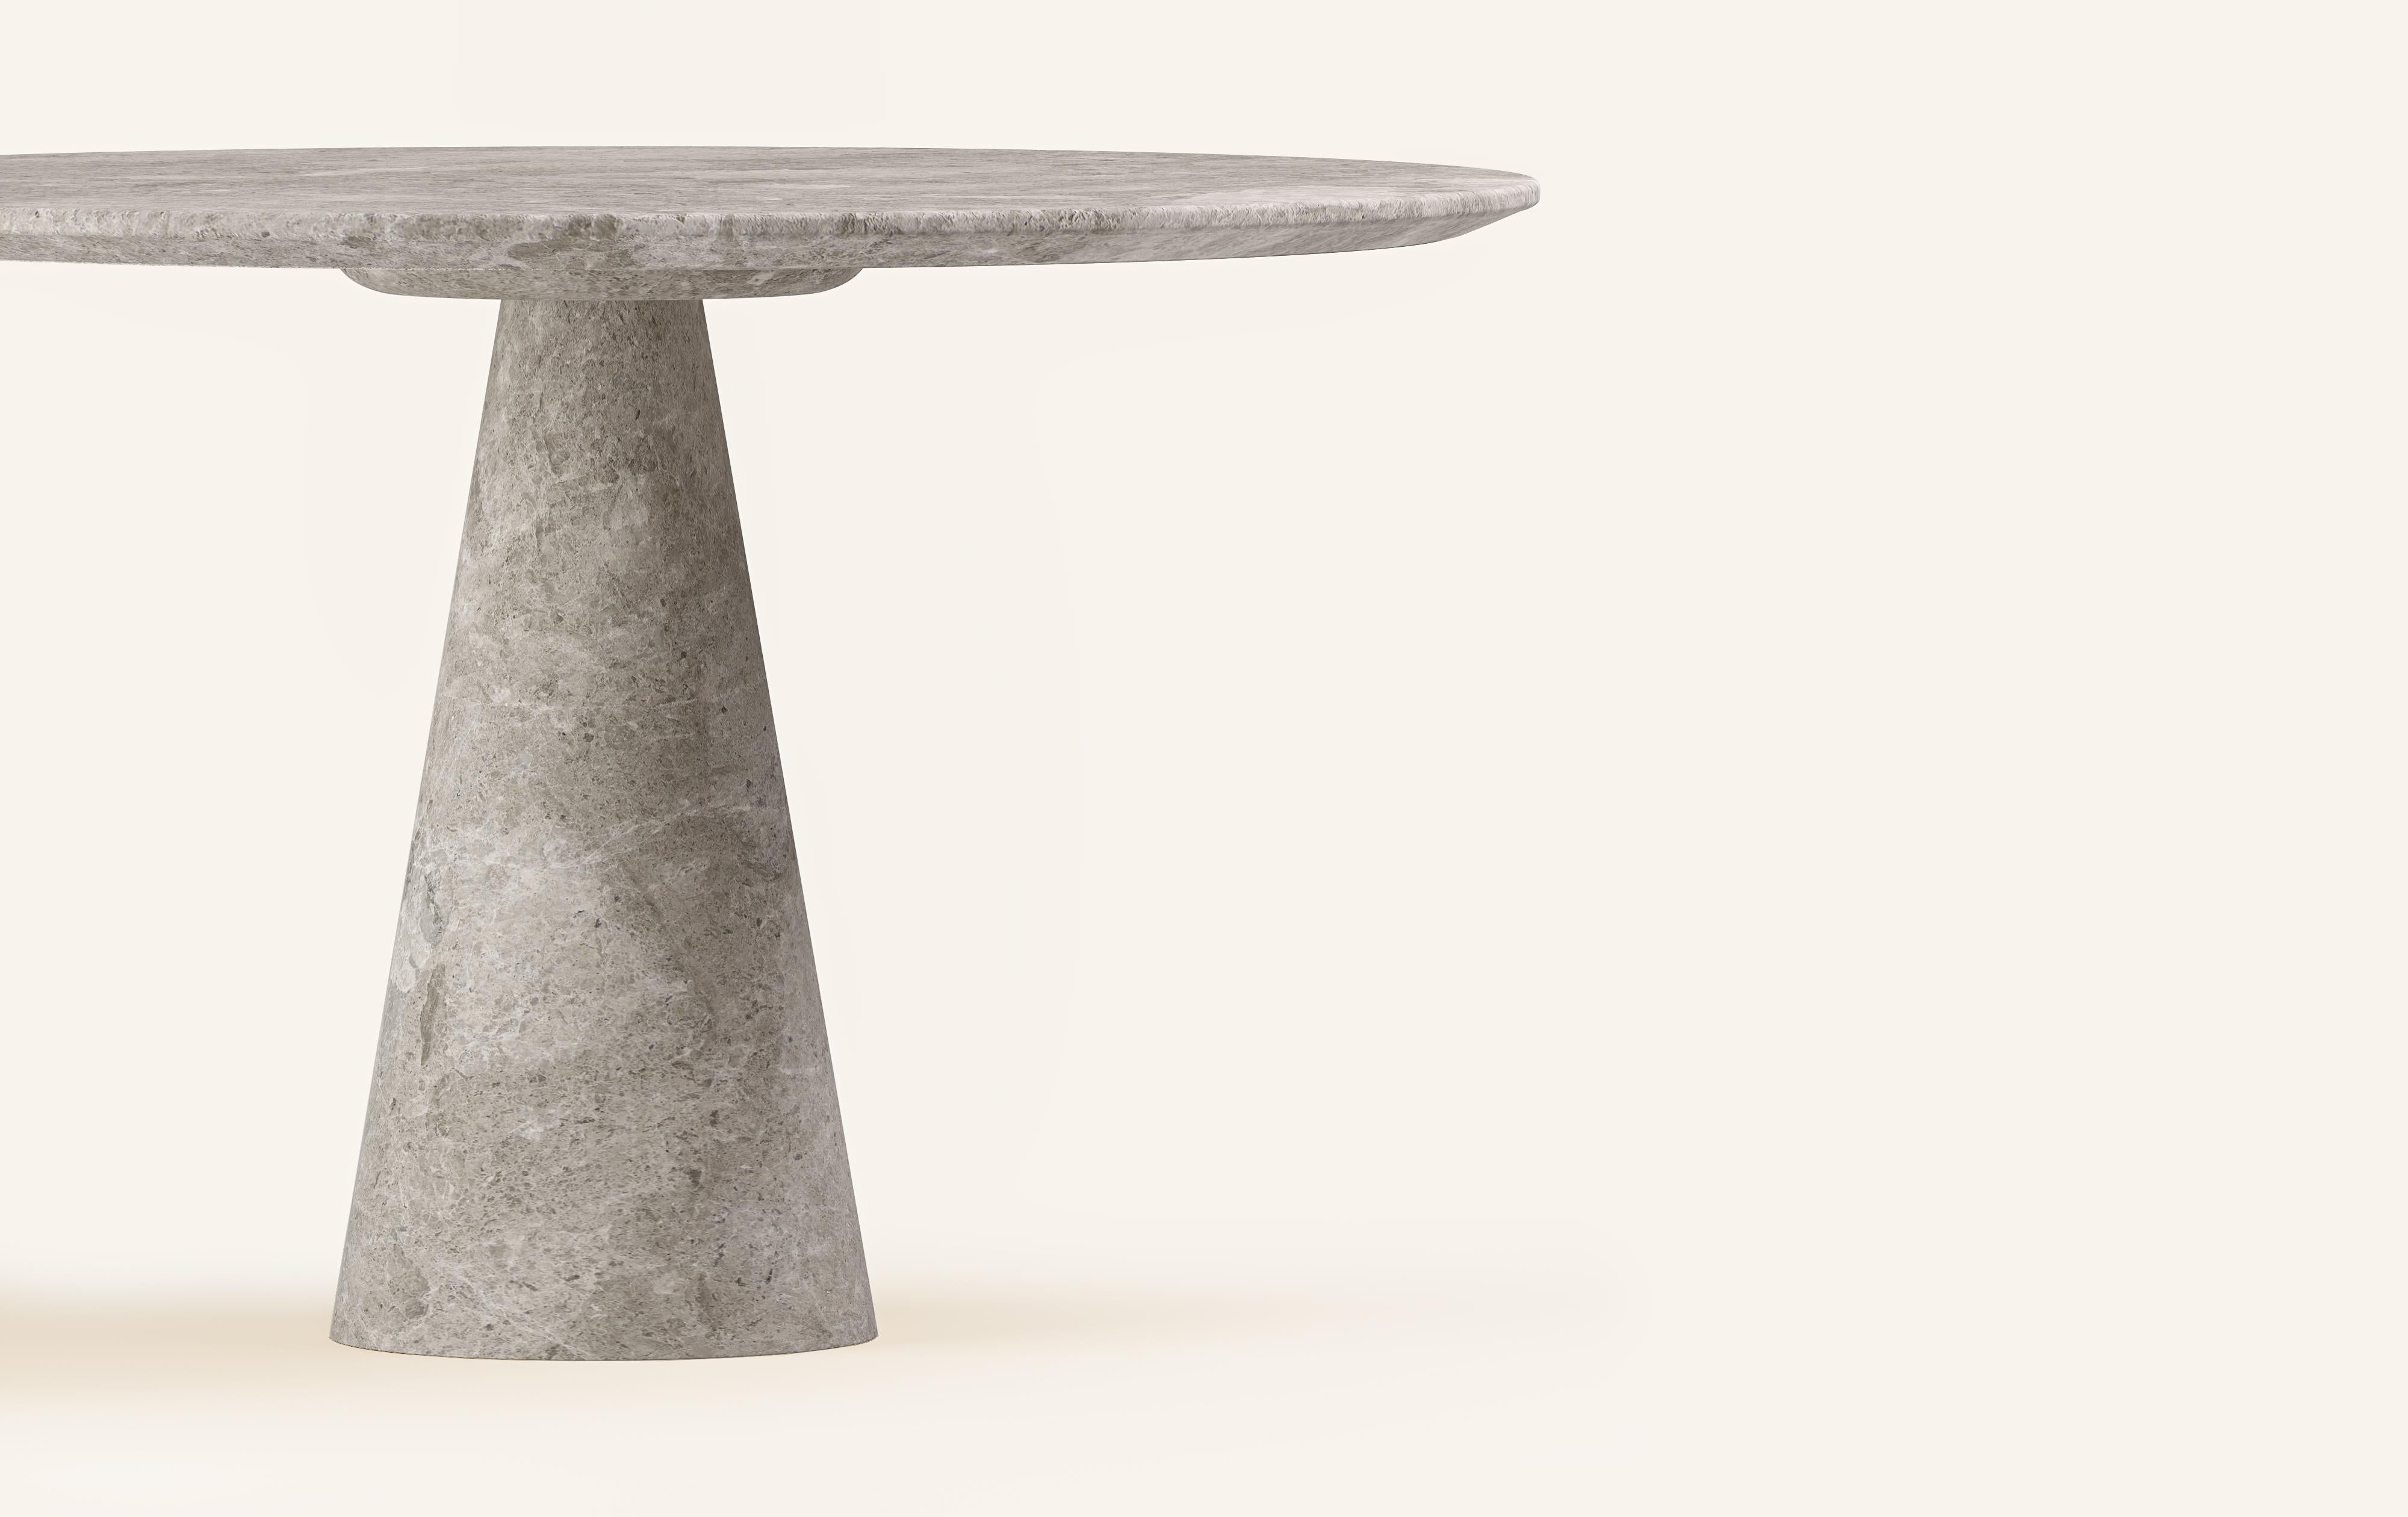 Organic Modern FORM(LA) Cono Round Dining Table 42”L x 42”W x 30”H Tundra Gray Marble For Sale